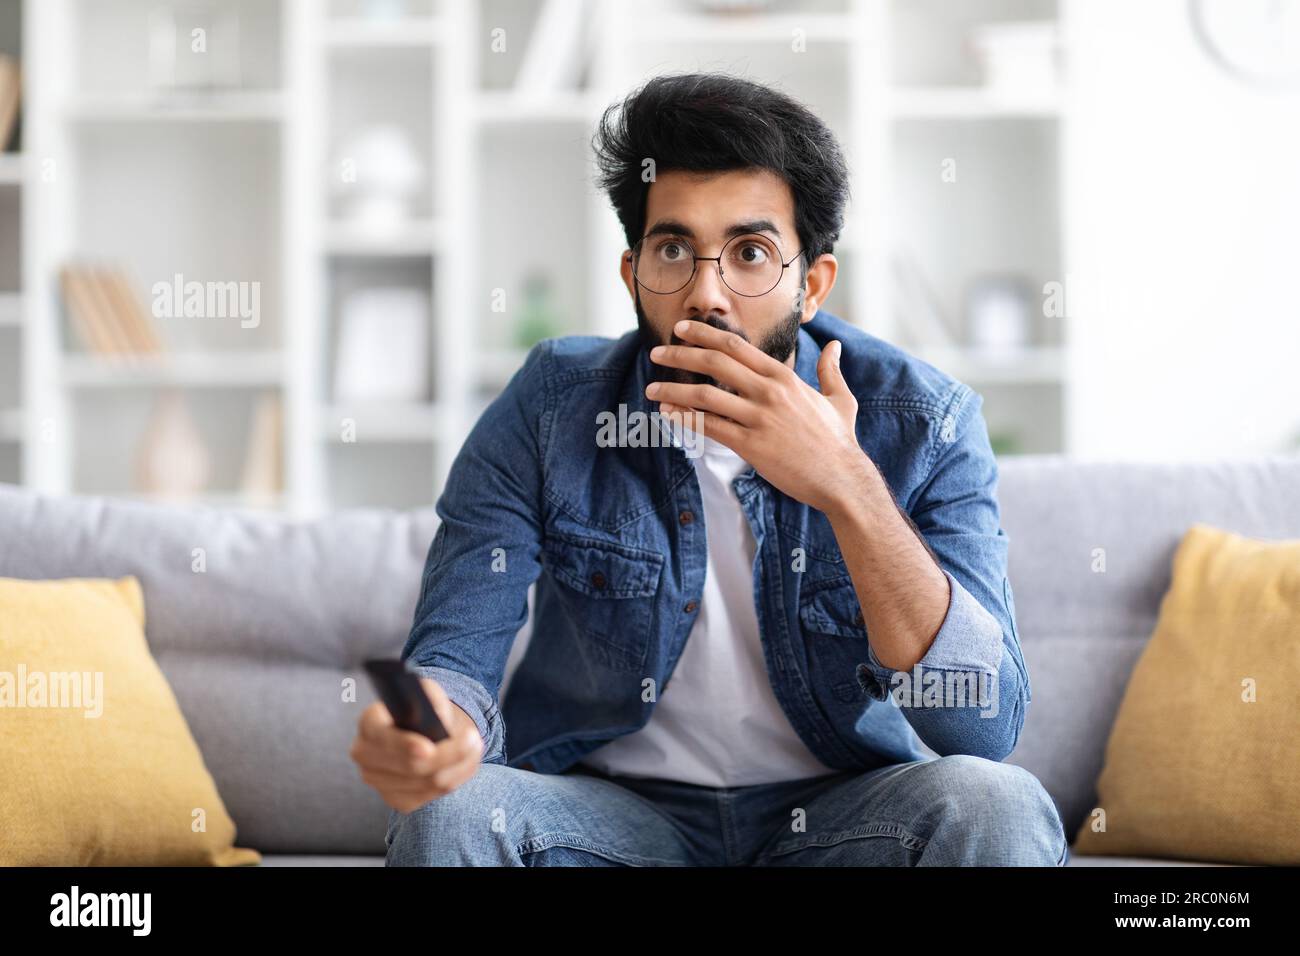 Shocked Indian Man With Remote Controller In Hand Sitting On Couch Stock Photo